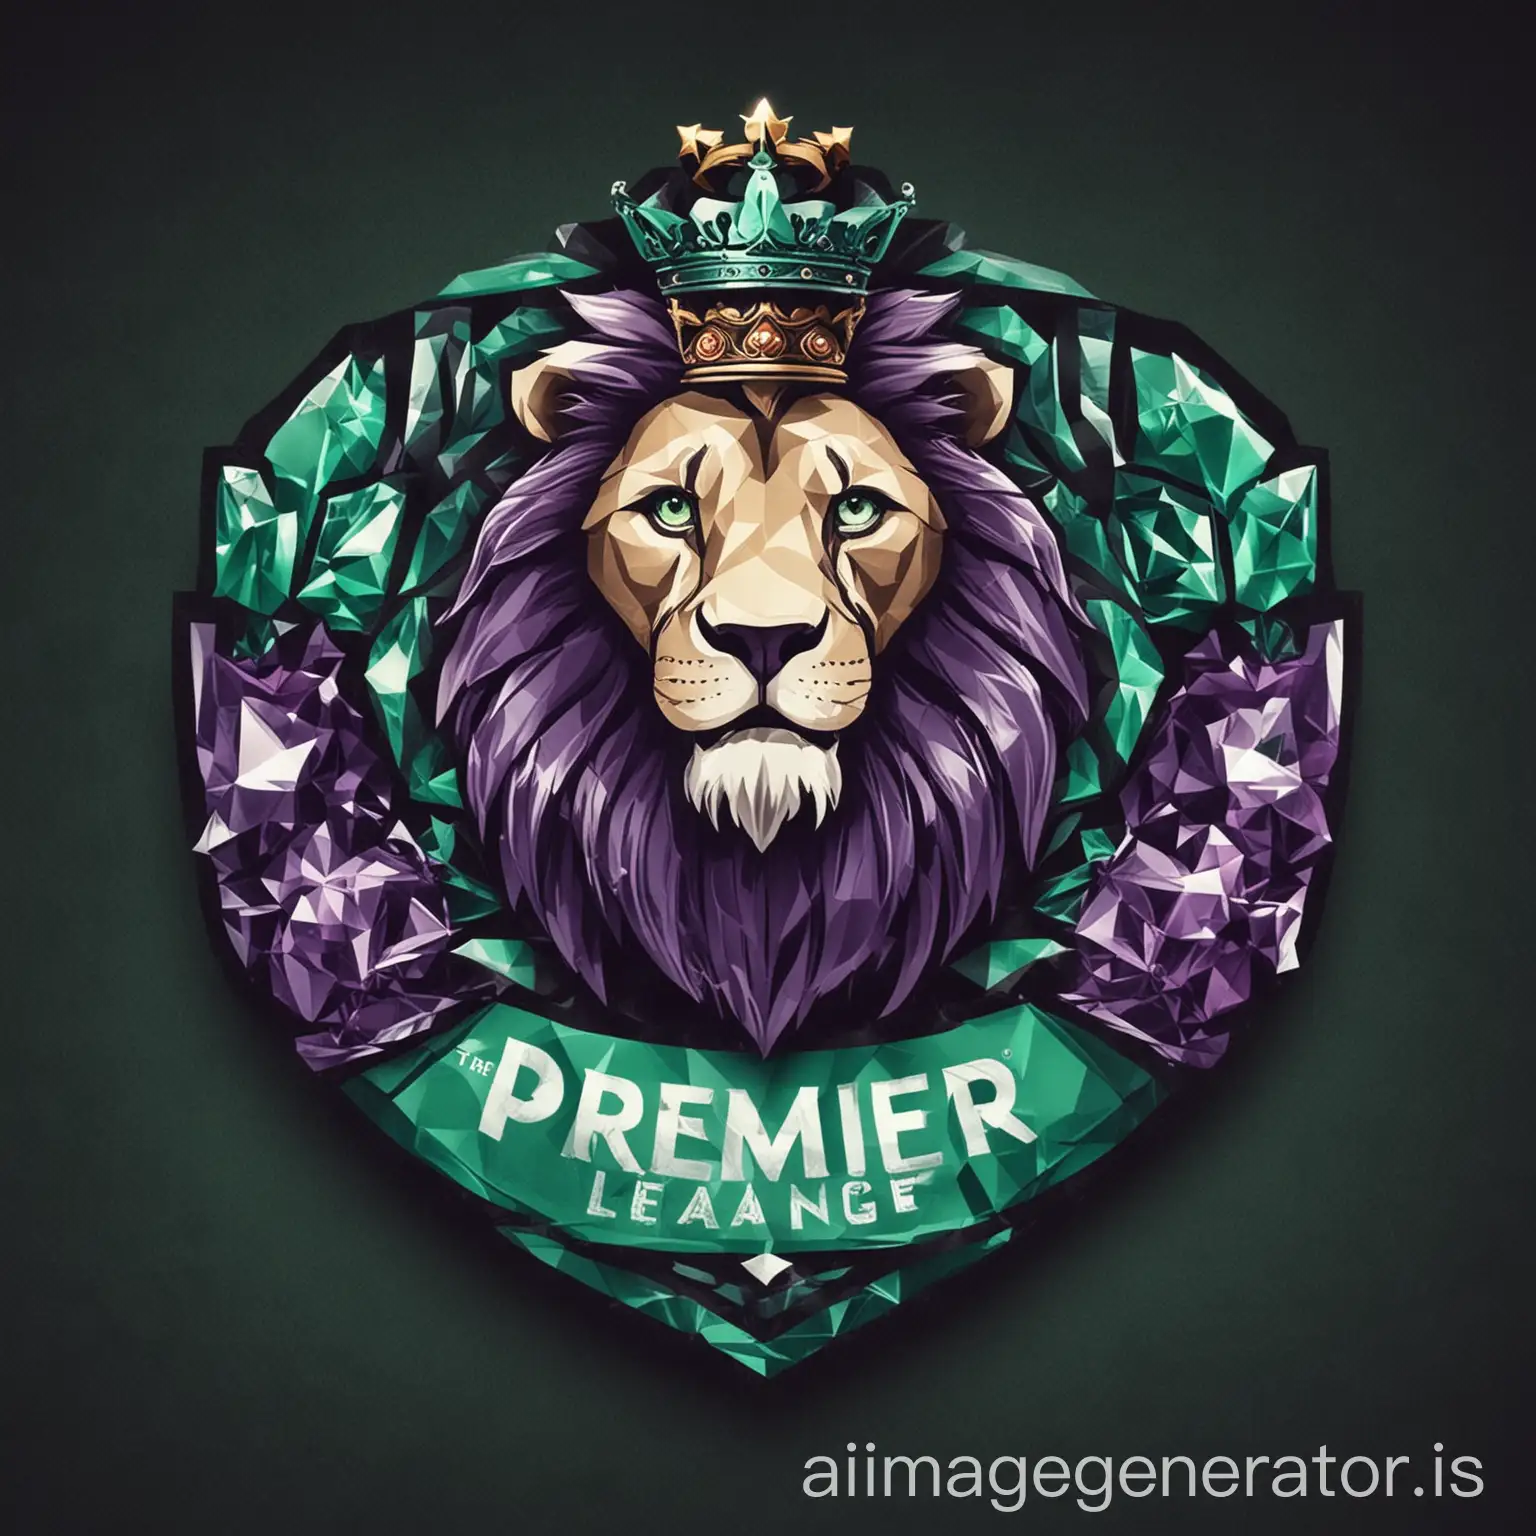 Premier-League-Logo-Featuring-Majestic-Lion-in-Emerald-and-Amethyst-Theme